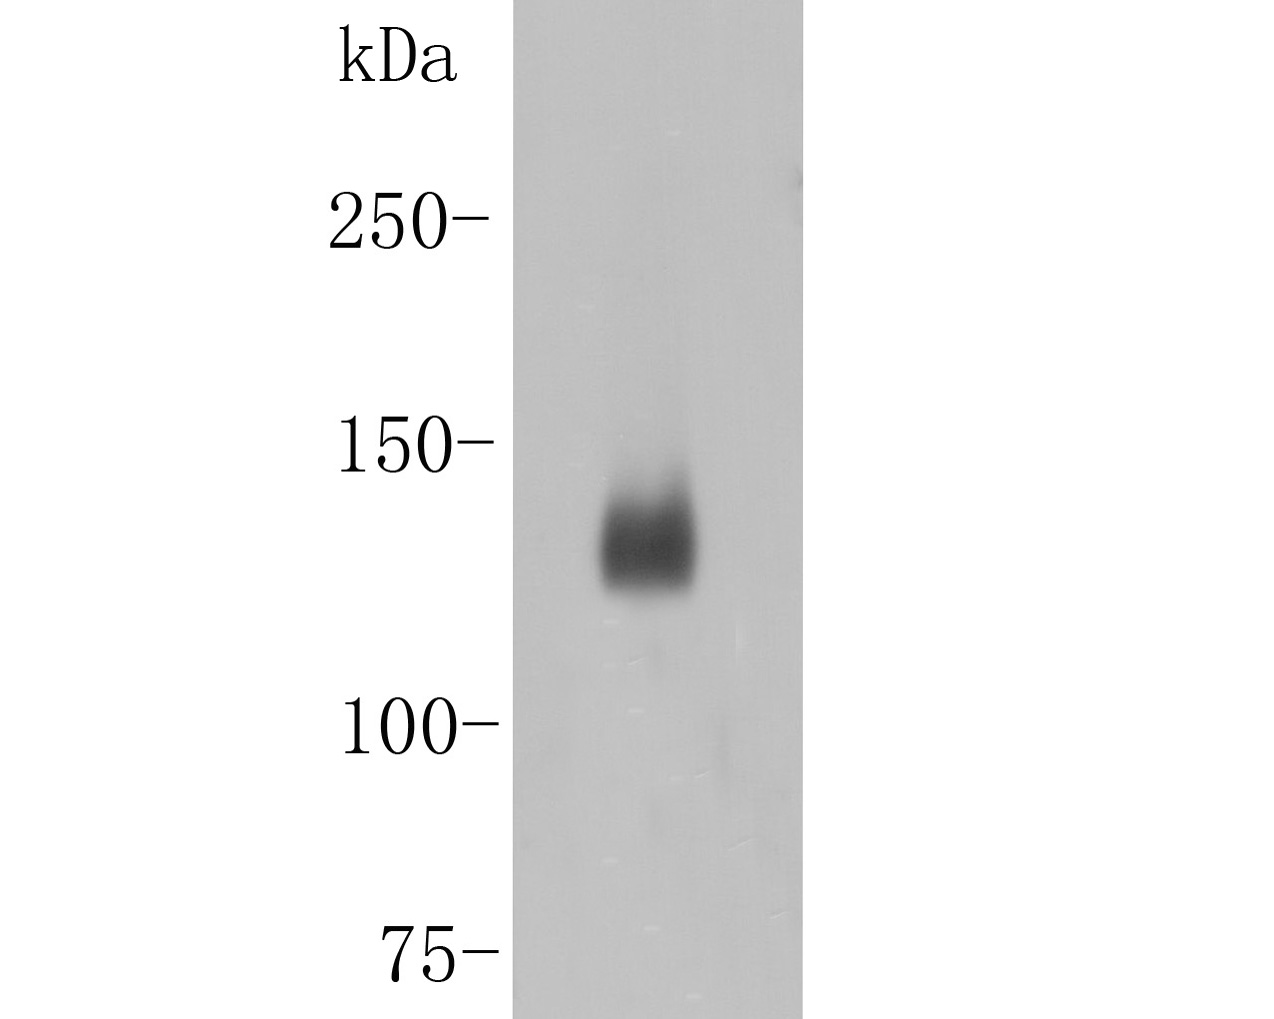 Western blot analysis of DSG3 on A431 cell lysates. Proteins were transferred to a PVDF membrane and blocked with 5% BSA in PBS for 1 hour at room temperature. The primary antibody (ER1901-81, 1/100) was used in 5% BSA at room temperature for 2 hours. Goat Anti-Rabbit IgG - HRP Secondary Antibody (HA1001) at 1:5,000 dilution was used for 1 hour at room temperature.